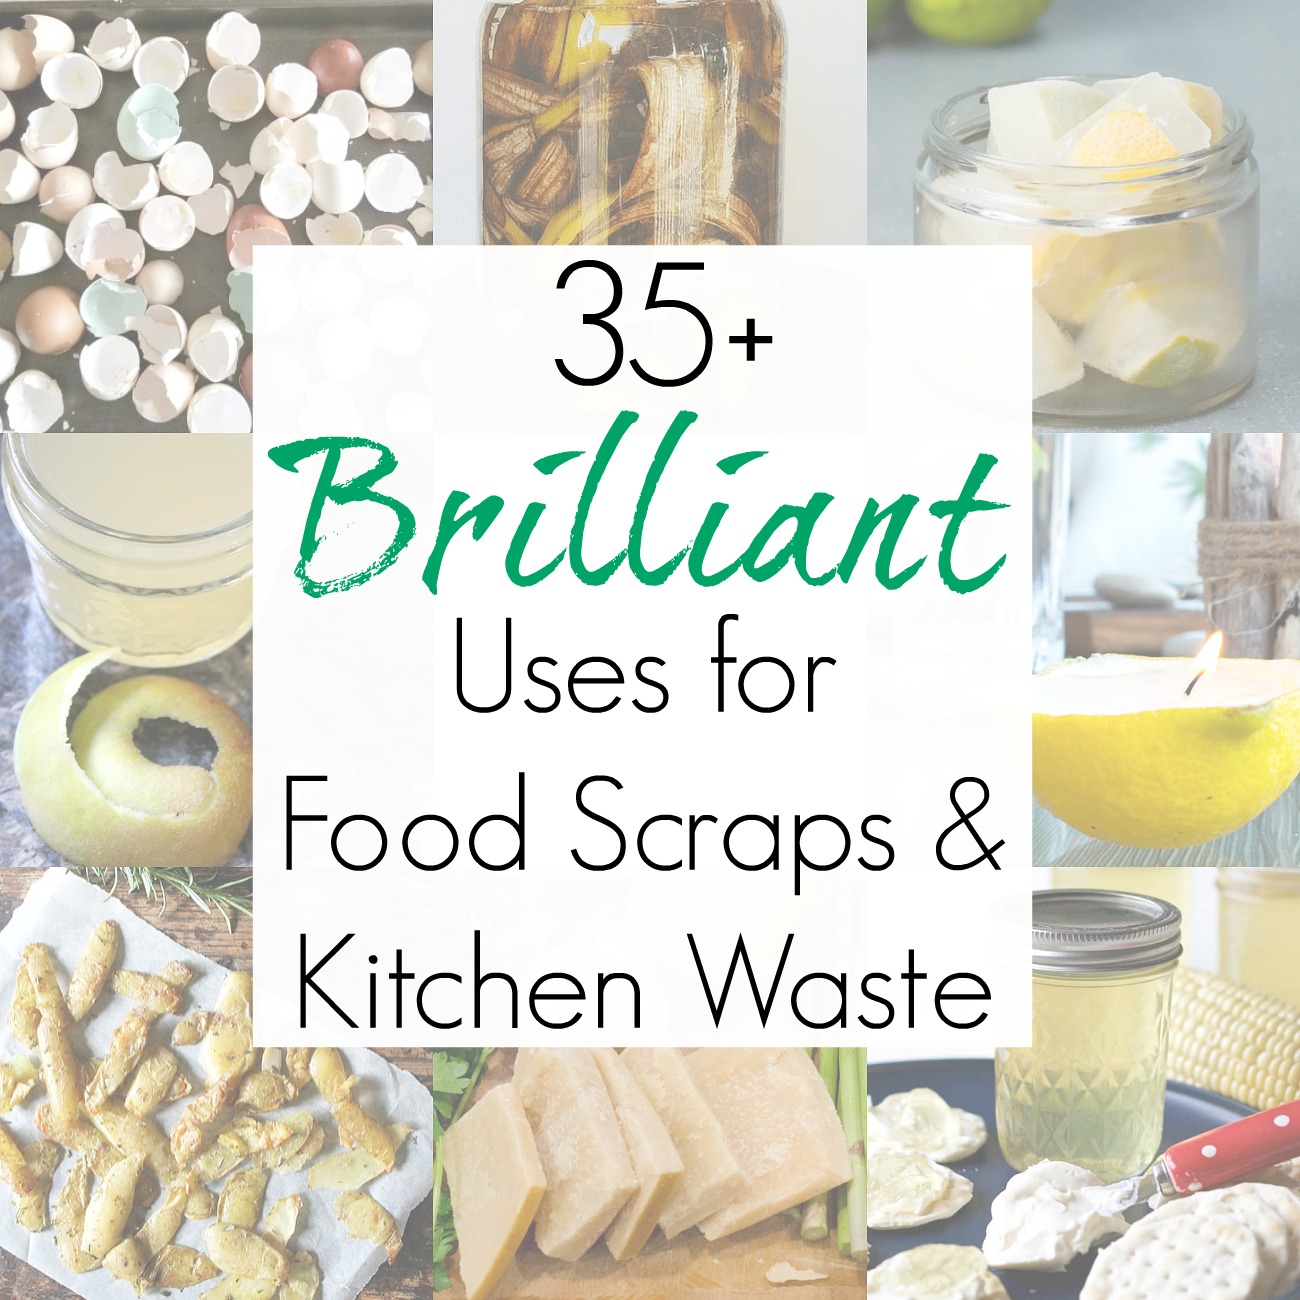 Clever ways to use food scraps and kitchen waste as well as food waste solutions